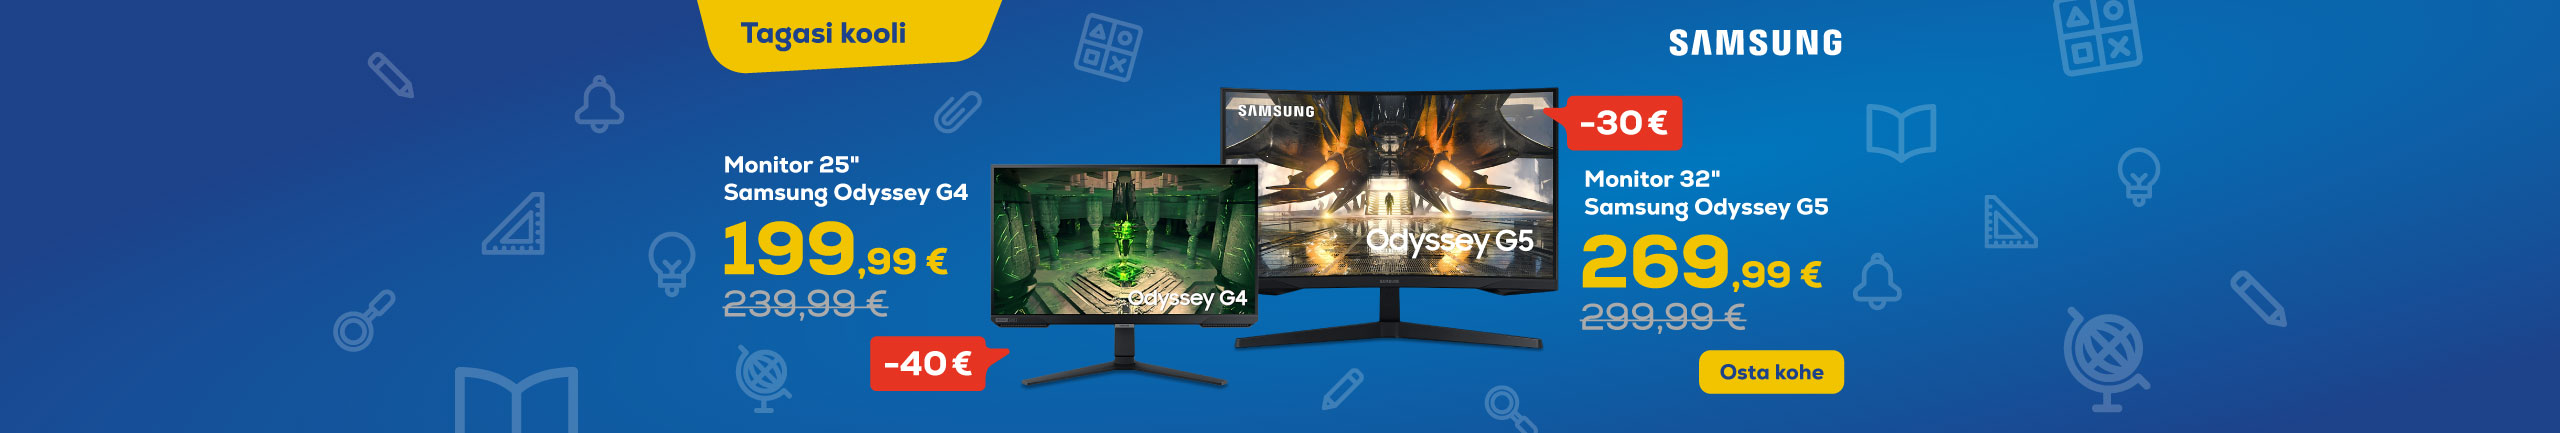 High-quality Samsung monitors for gaming!